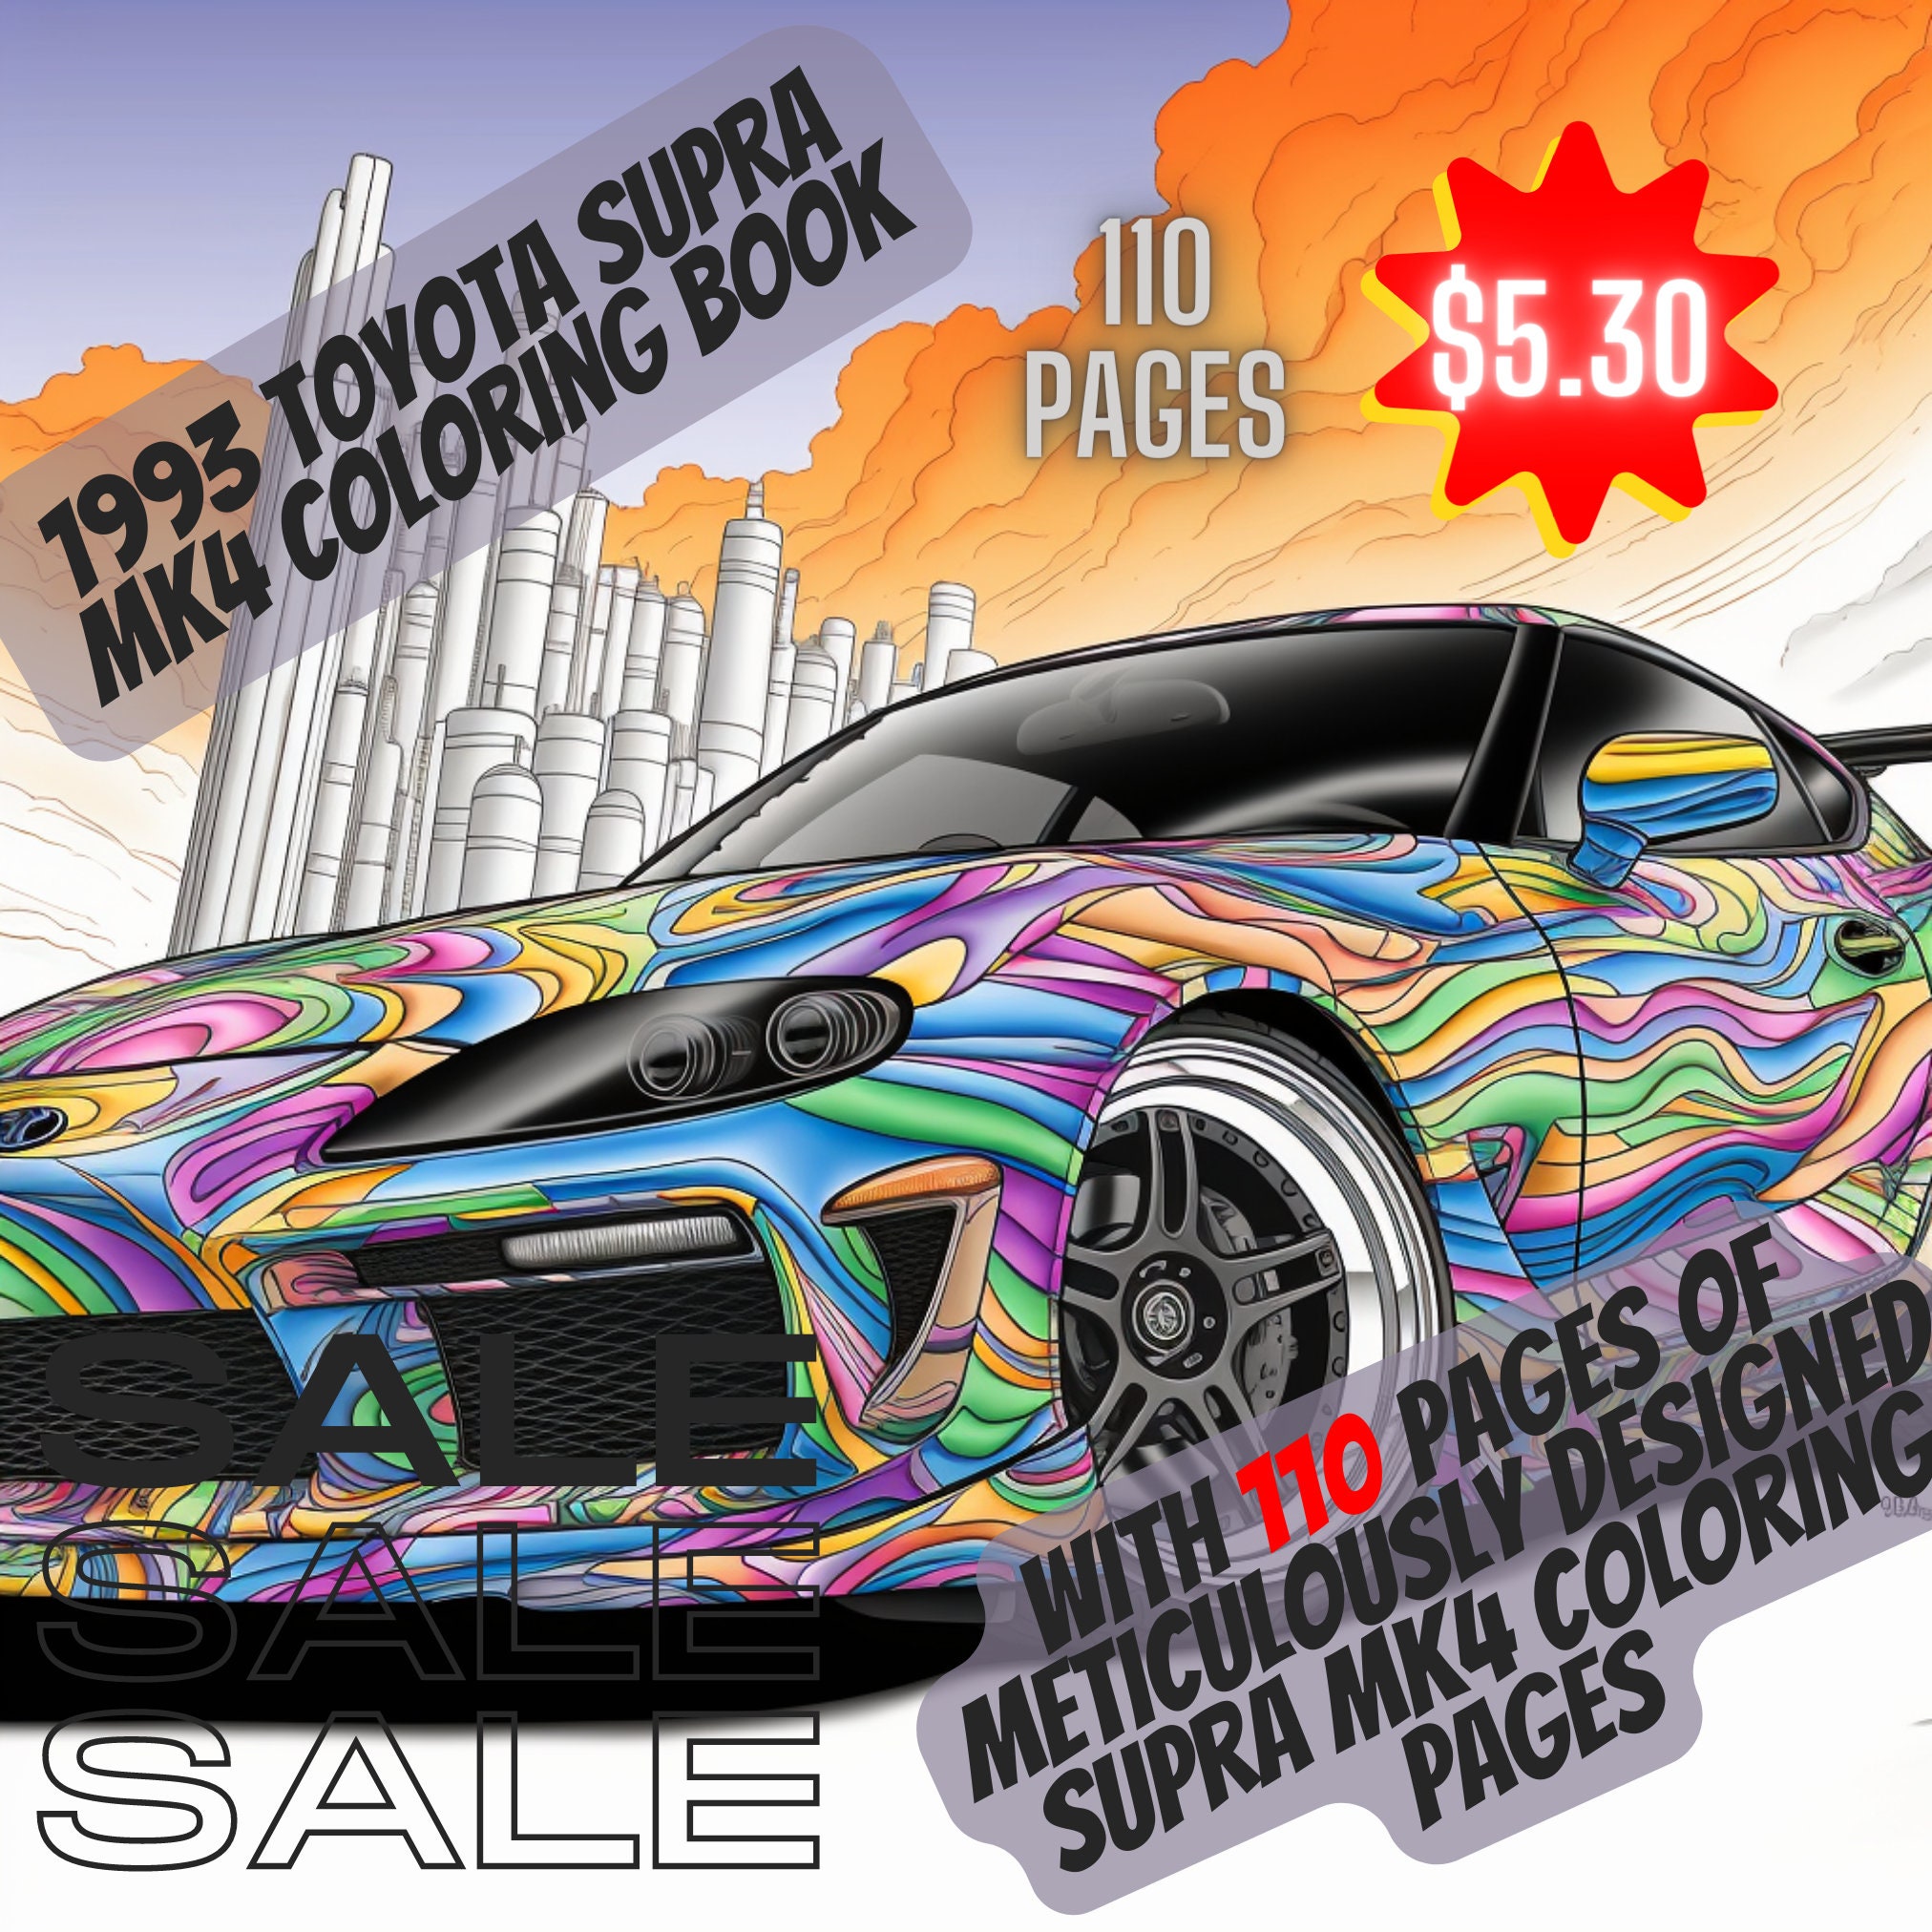 Toyota supra mk with pages of meticulously designed supra mk coloring pages instant download